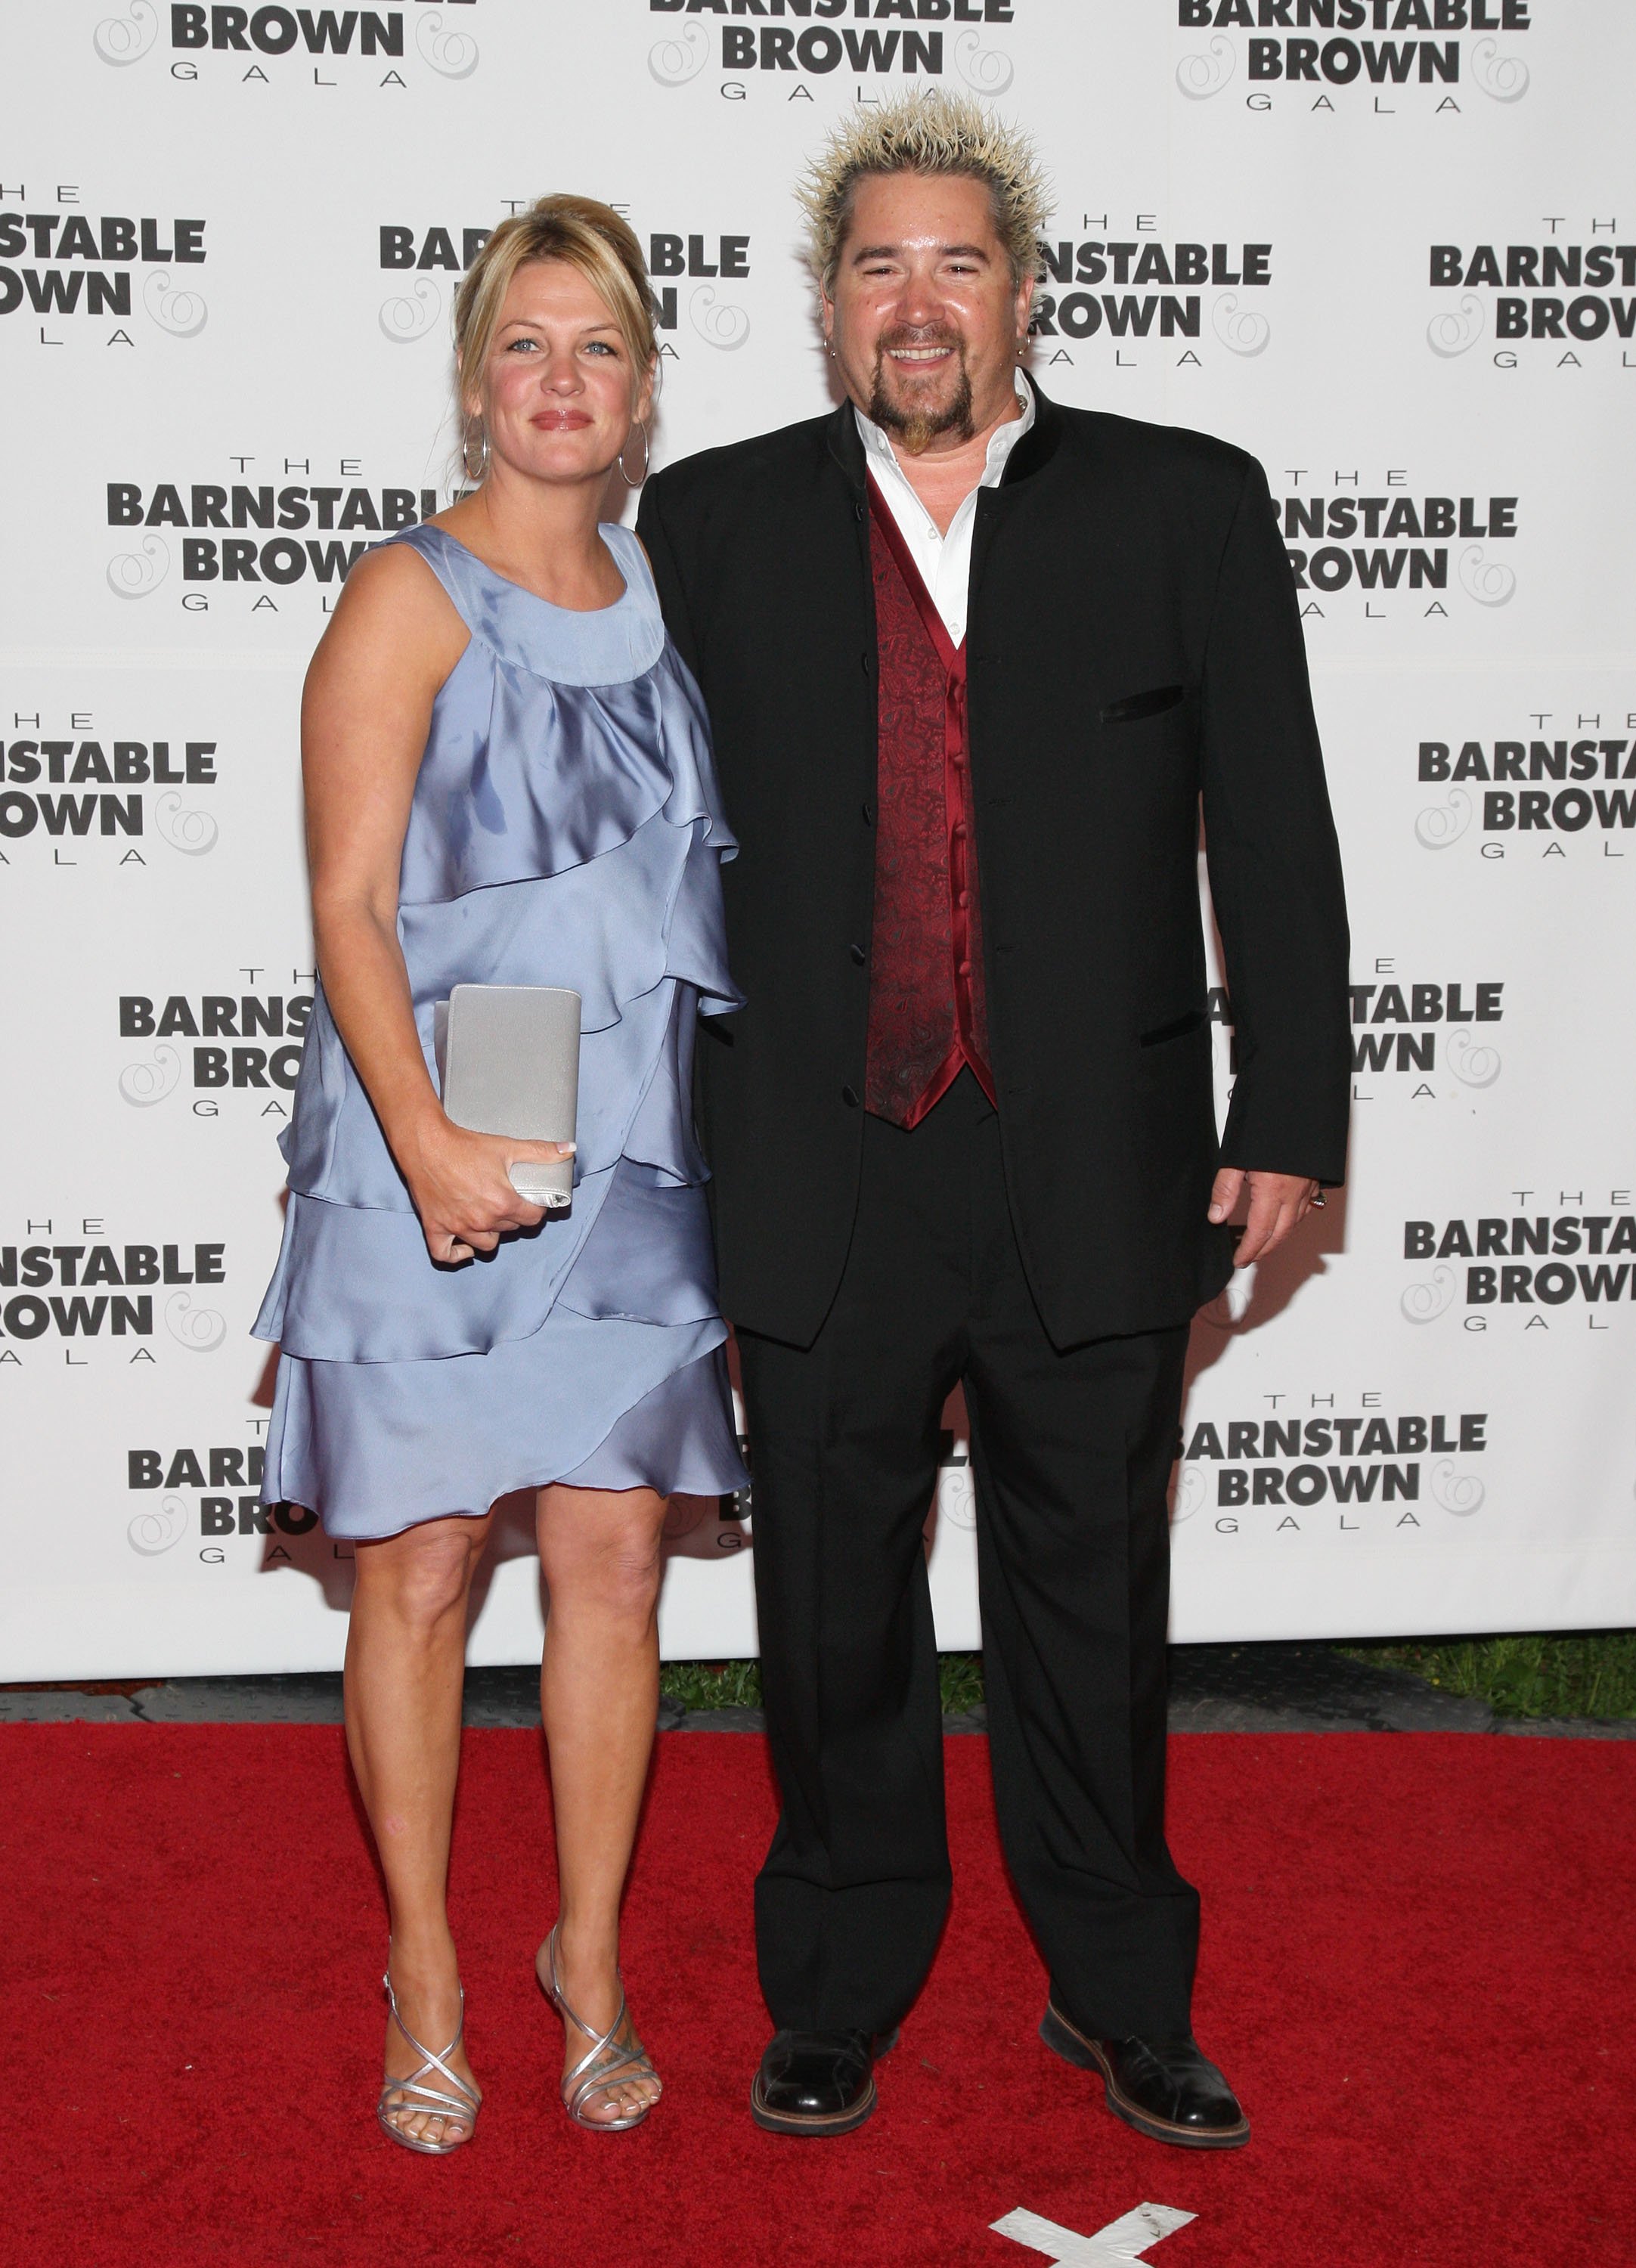 Lori Fieri and Guy Fieri pose on the red carpet at the Barnstable Brown Party Celebrating The 135th Kentucky Derby on May 1, 2009 in Louisville | Source: Getty Images